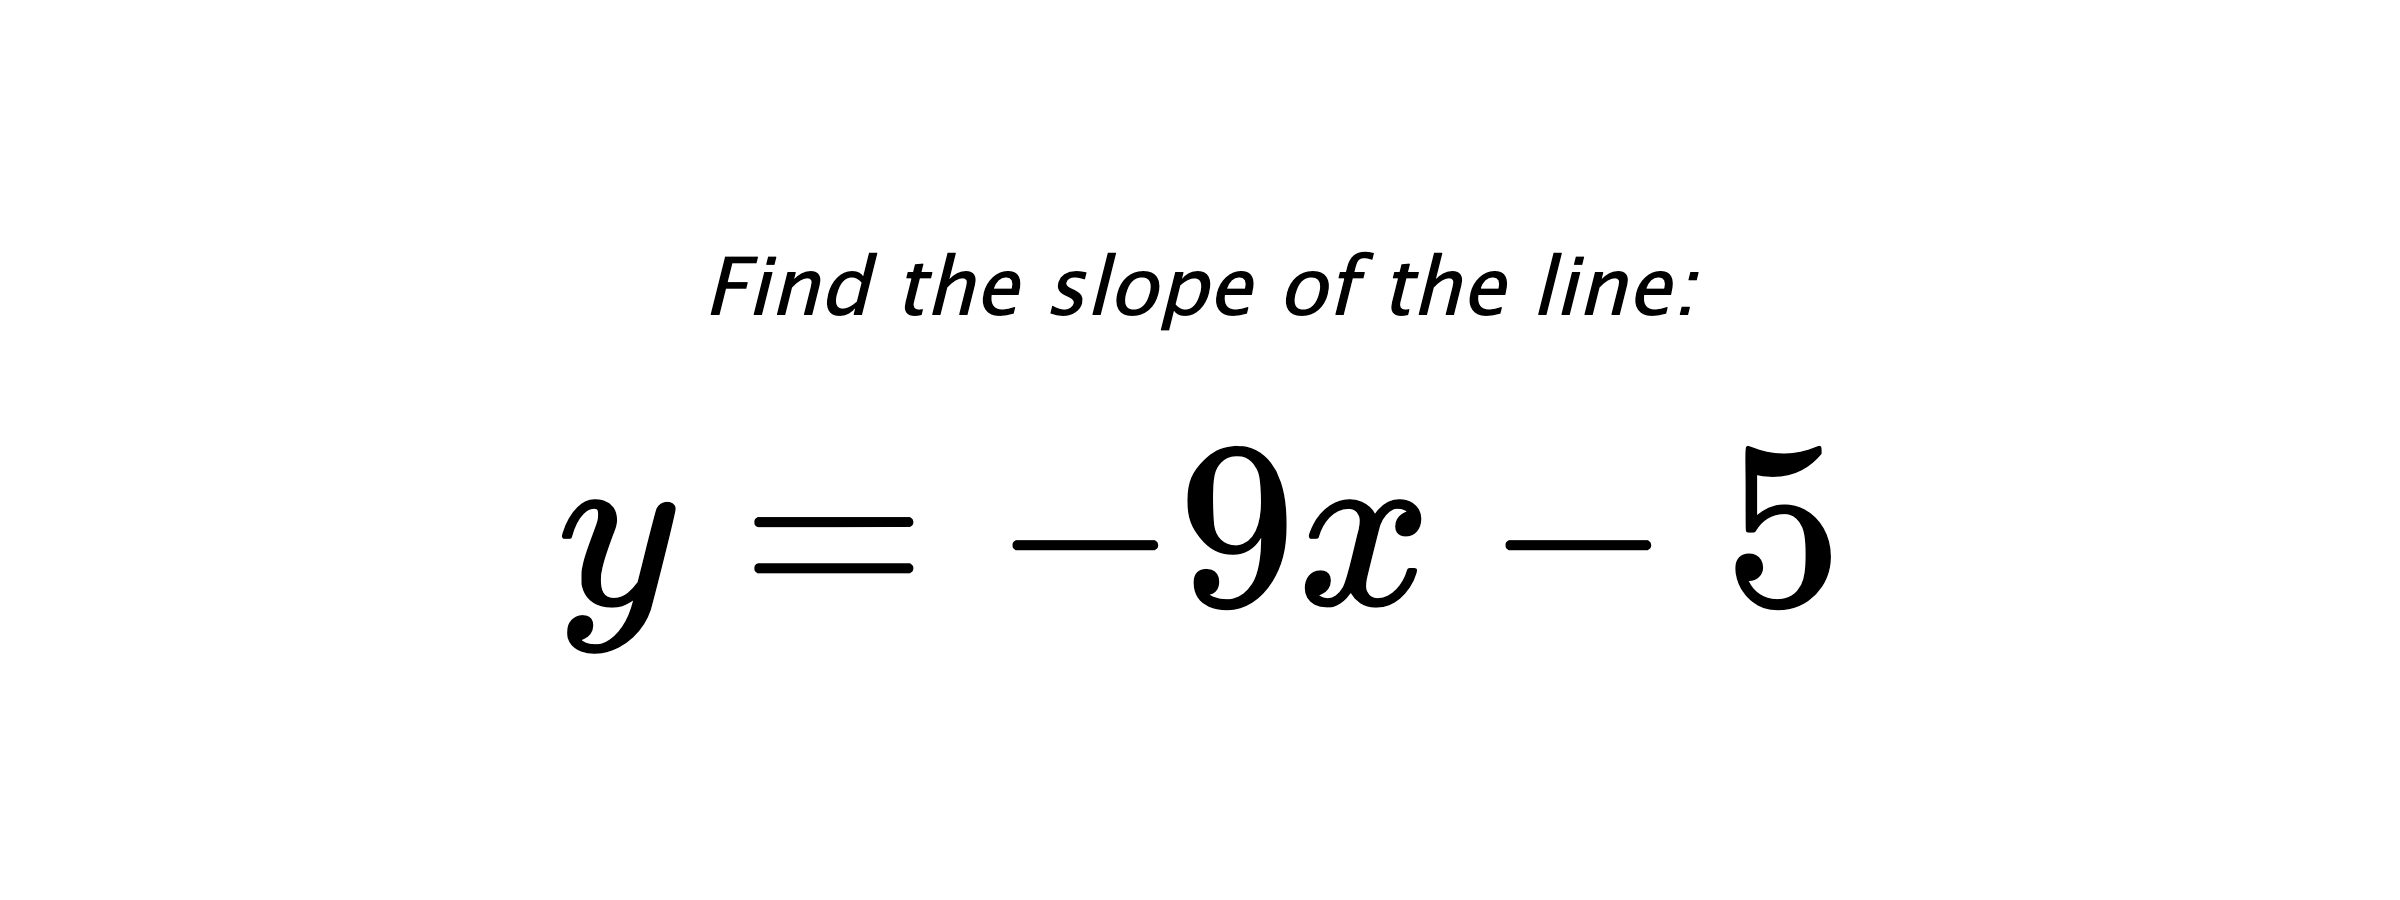 Find the slope of the line: $ y=-9x-5 $